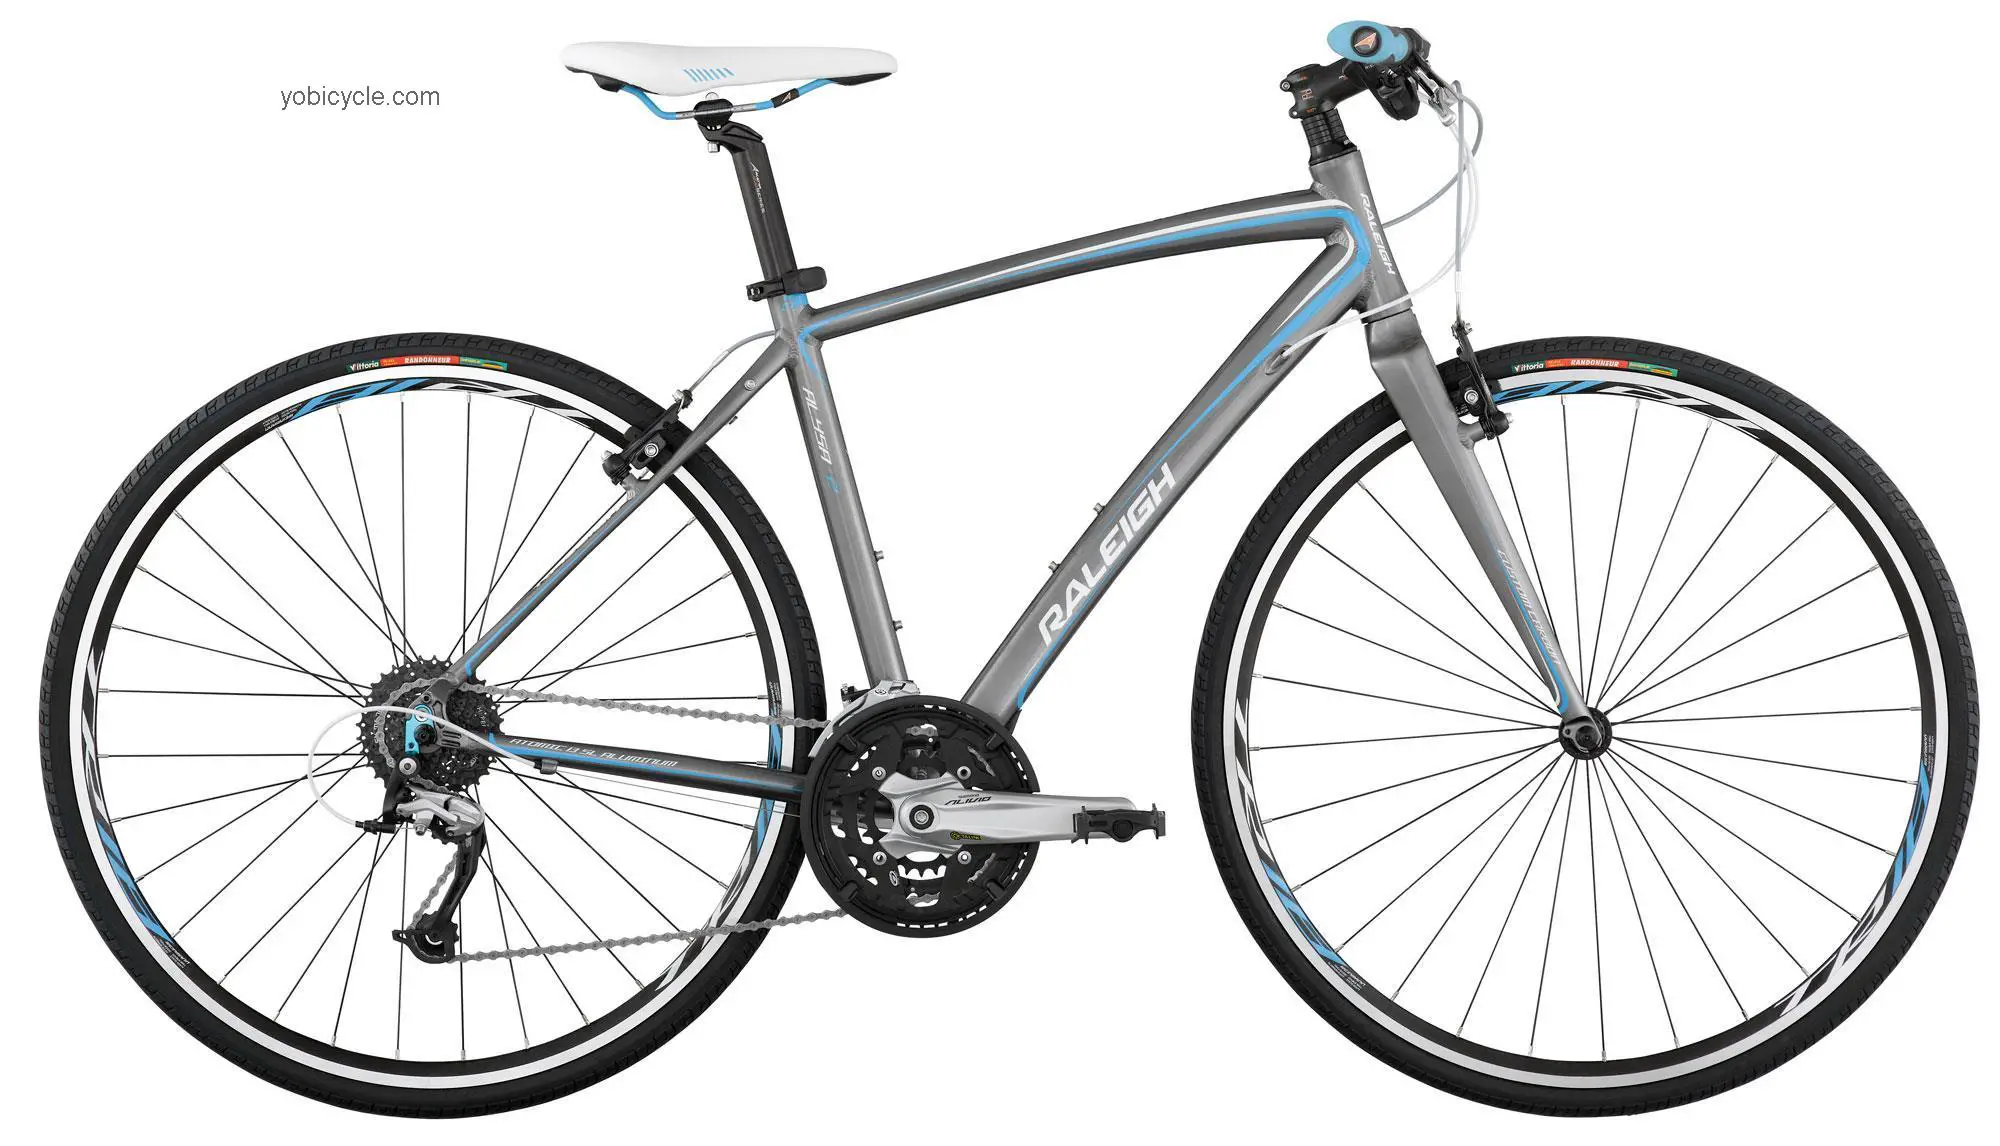 Raleigh Alysa FT2 2012 comparison online with competitors